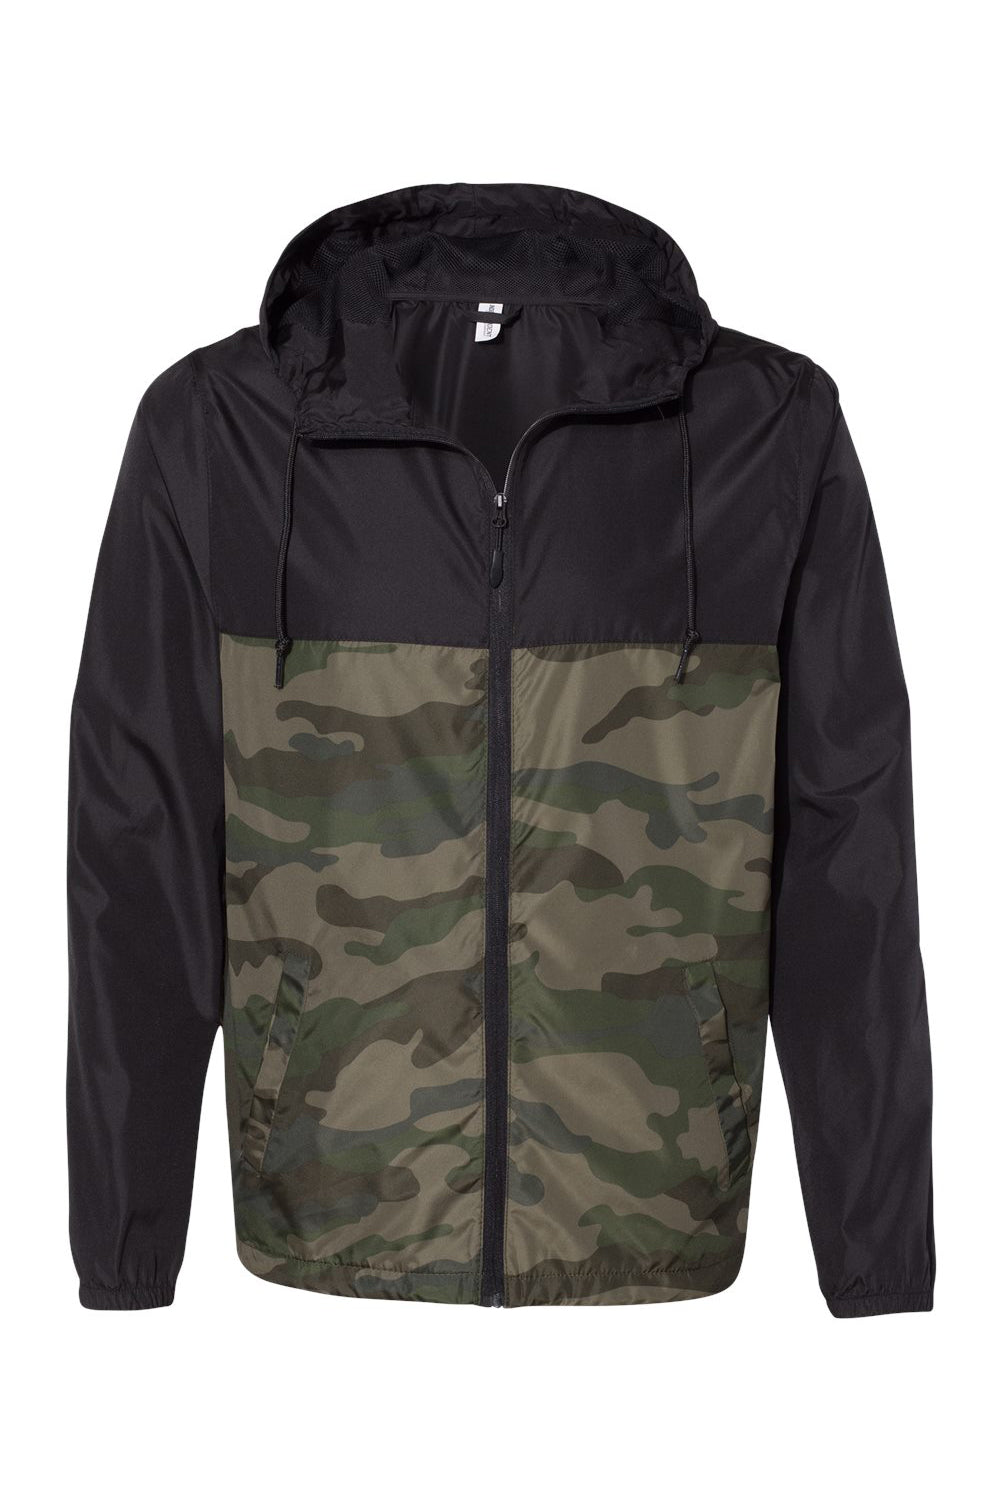 Independent Trading Co. EXP54LWZ Mens Full Zip Windbreaker Hooded Jacket Black/Forest Green Camo Flat Front